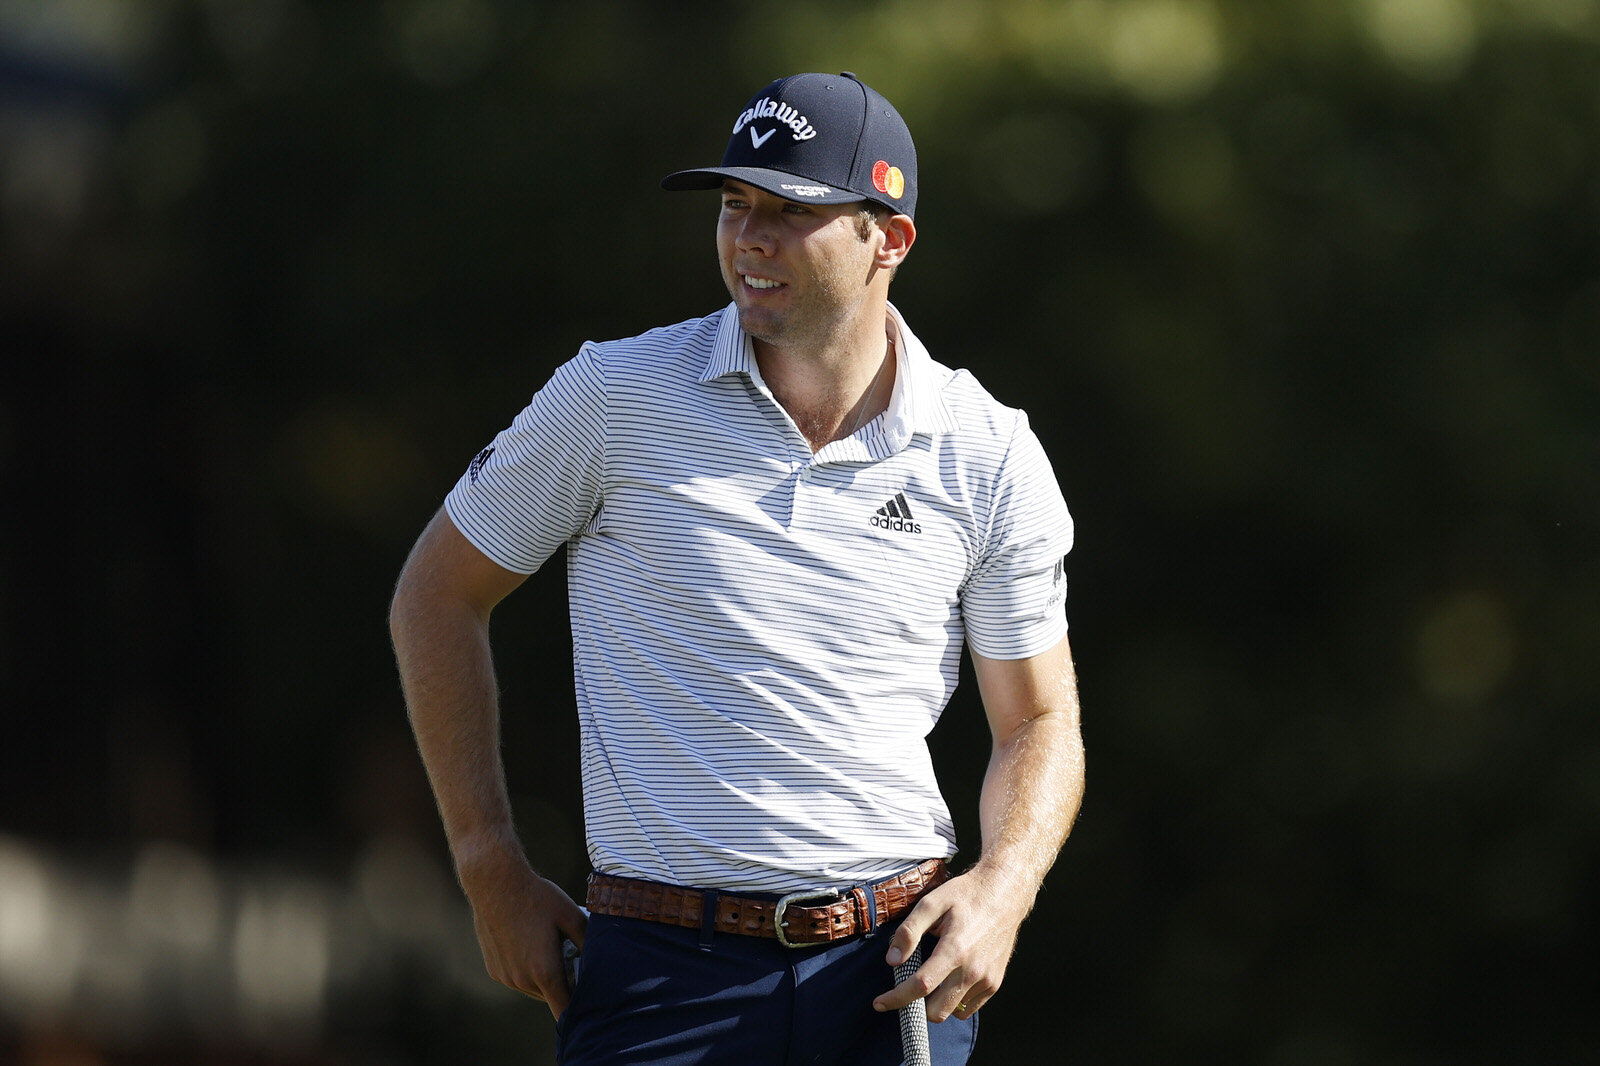  HOUSTON, TEXAS - NOVEMBER 07: Sam Burns of the United States reacts during the third round of the Houston Open at Memorial Park Golf Course on November 07, 2020 in Houston, Texas. (Photo by Carmen Mandato/Getty Images) 